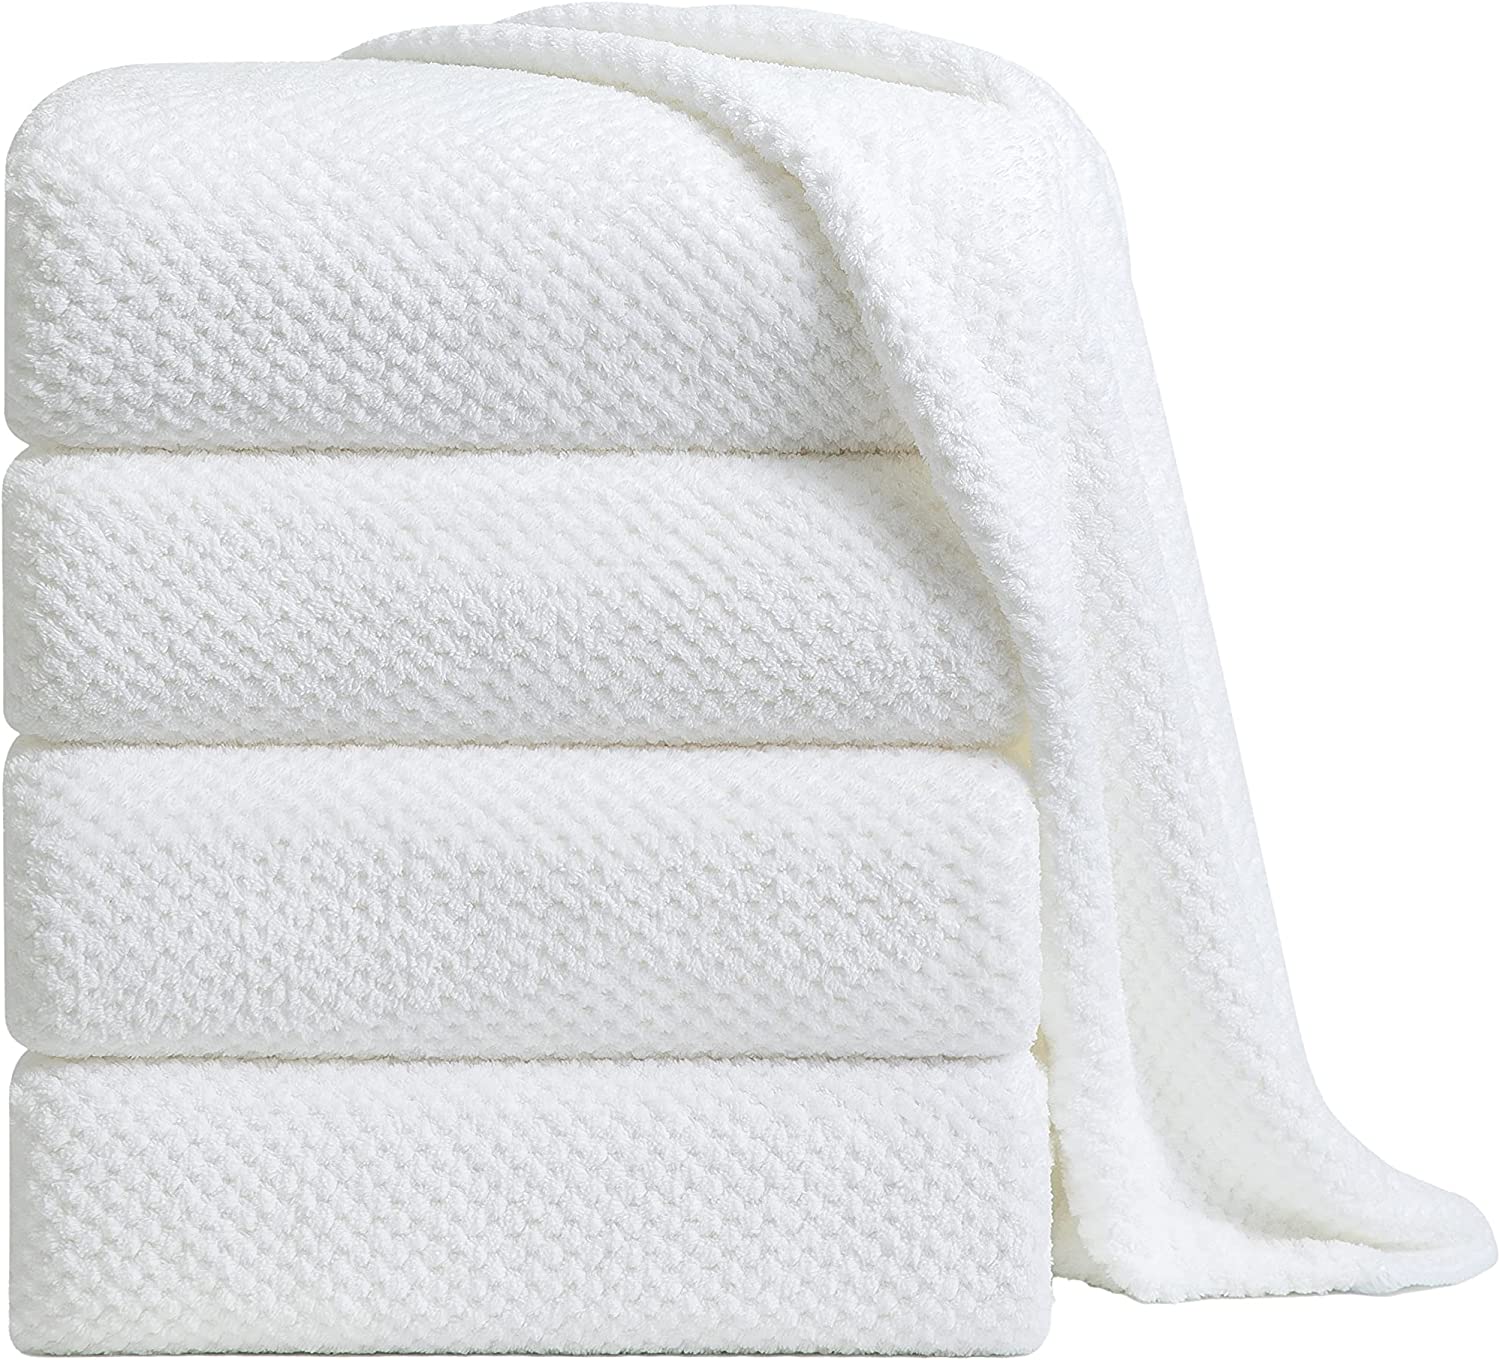 Extra Large Bath Towel Sheet Set 35x70 Inches - Oversized Highly Absorbent  Towels Set,Jumbo Microfiber - Quick Dry, Lightweight,Super Soft for